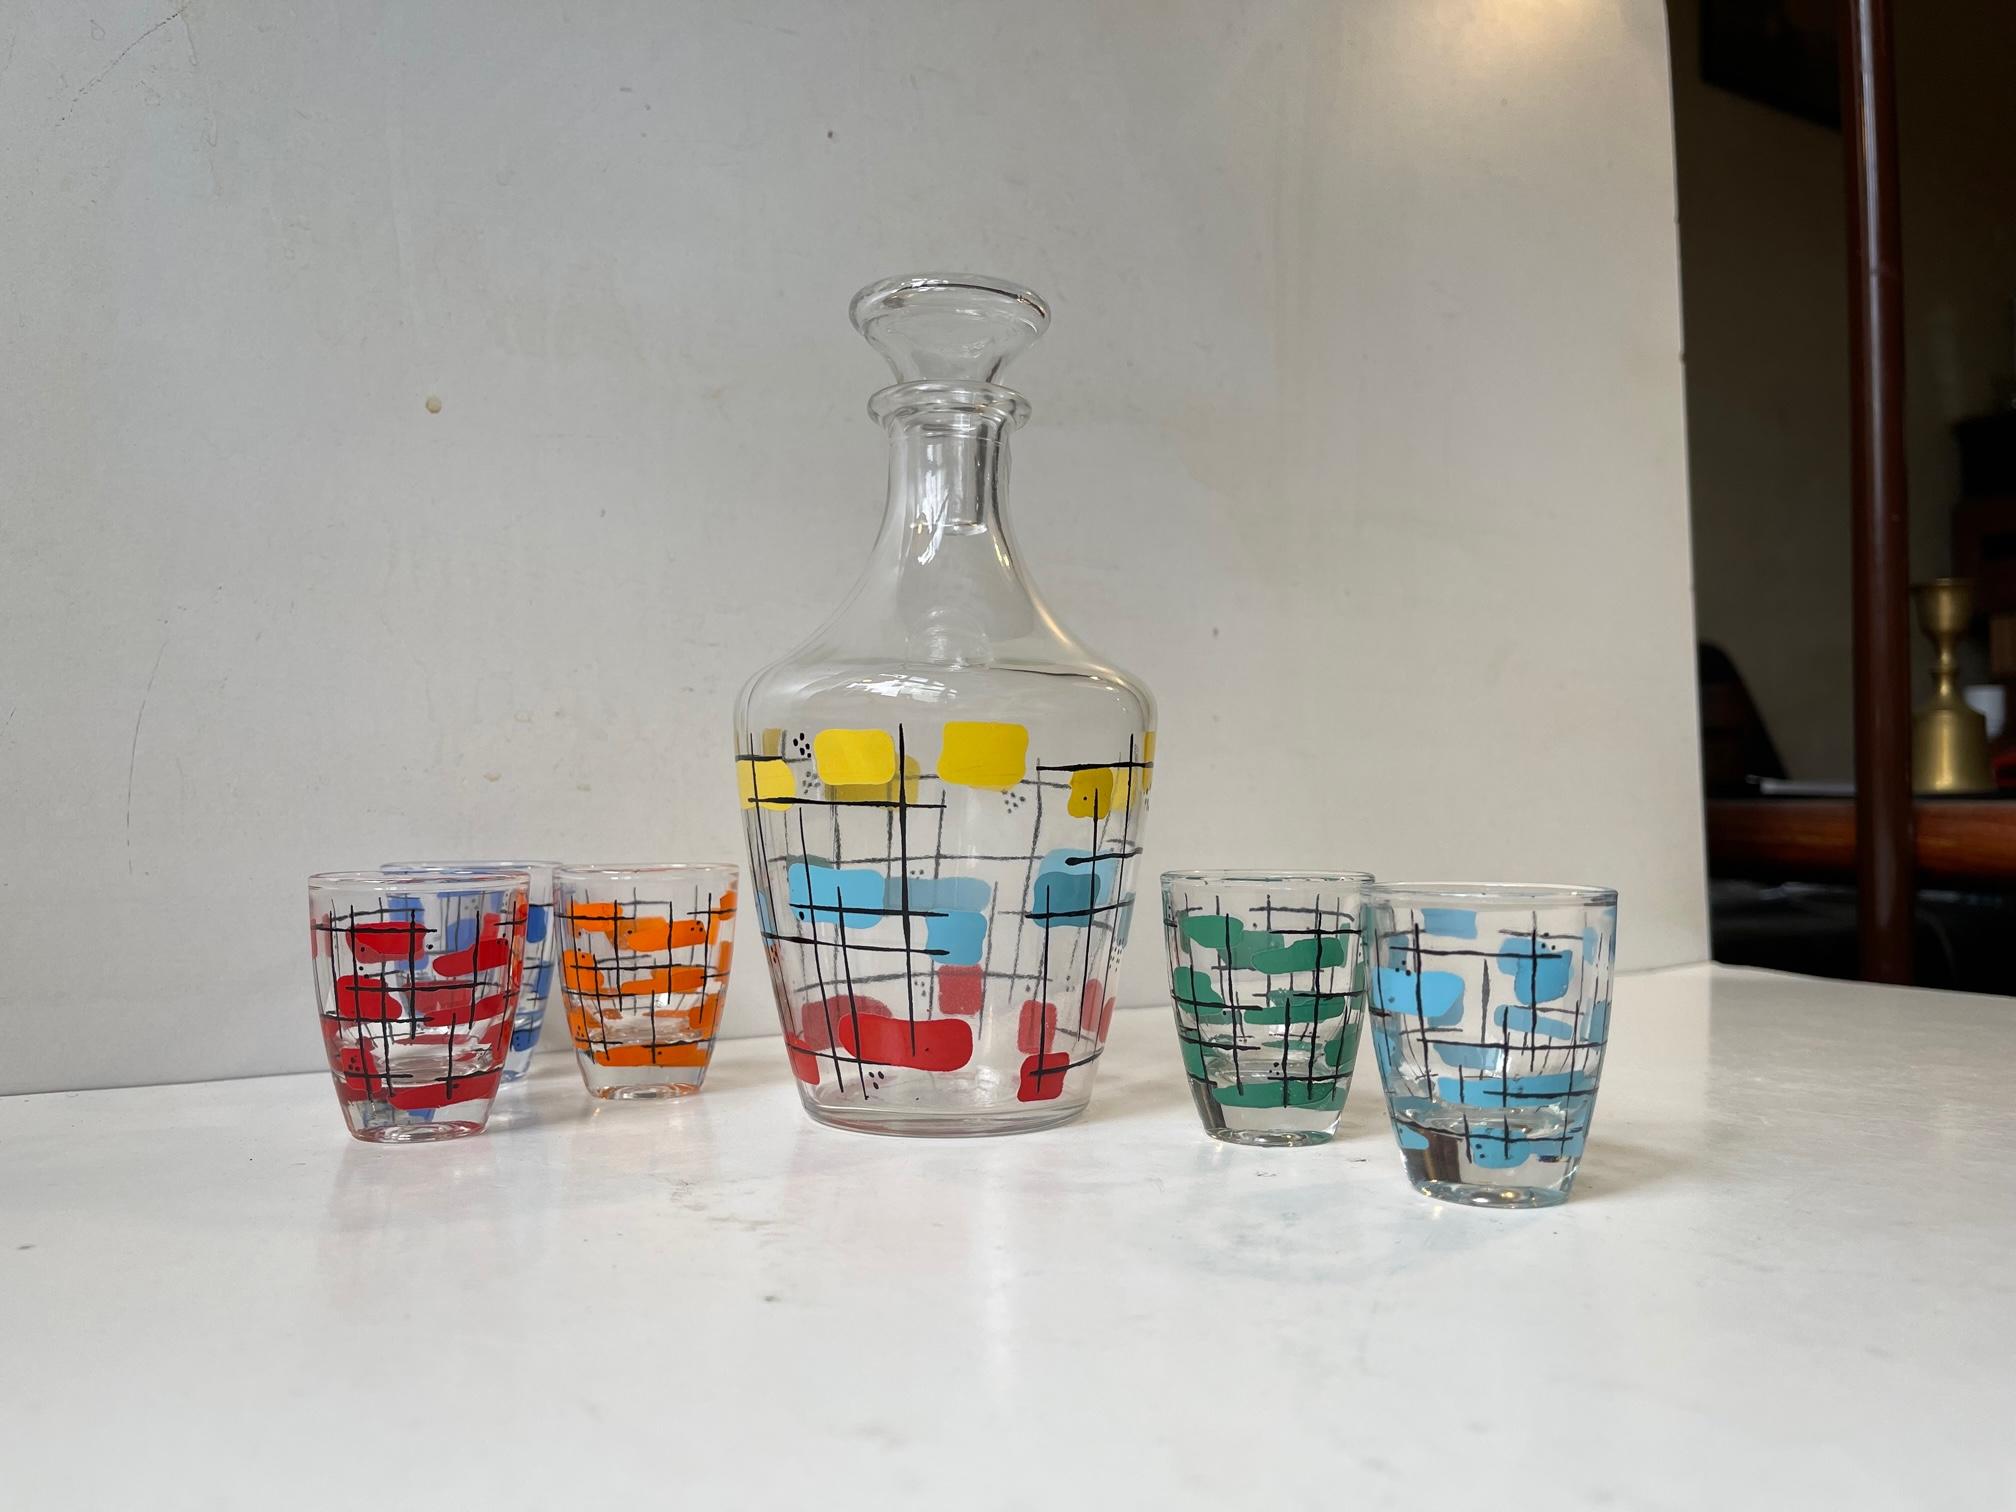 A French liquor set consisting of small decanter (0.4-0.5 l) and 5 matching glass. Transferprintet modernist motifs in diffrent colors. Imprinted France beneath the base of the decanter. Measurements: H: 18/5 cm Diameter: 11/4 cm.